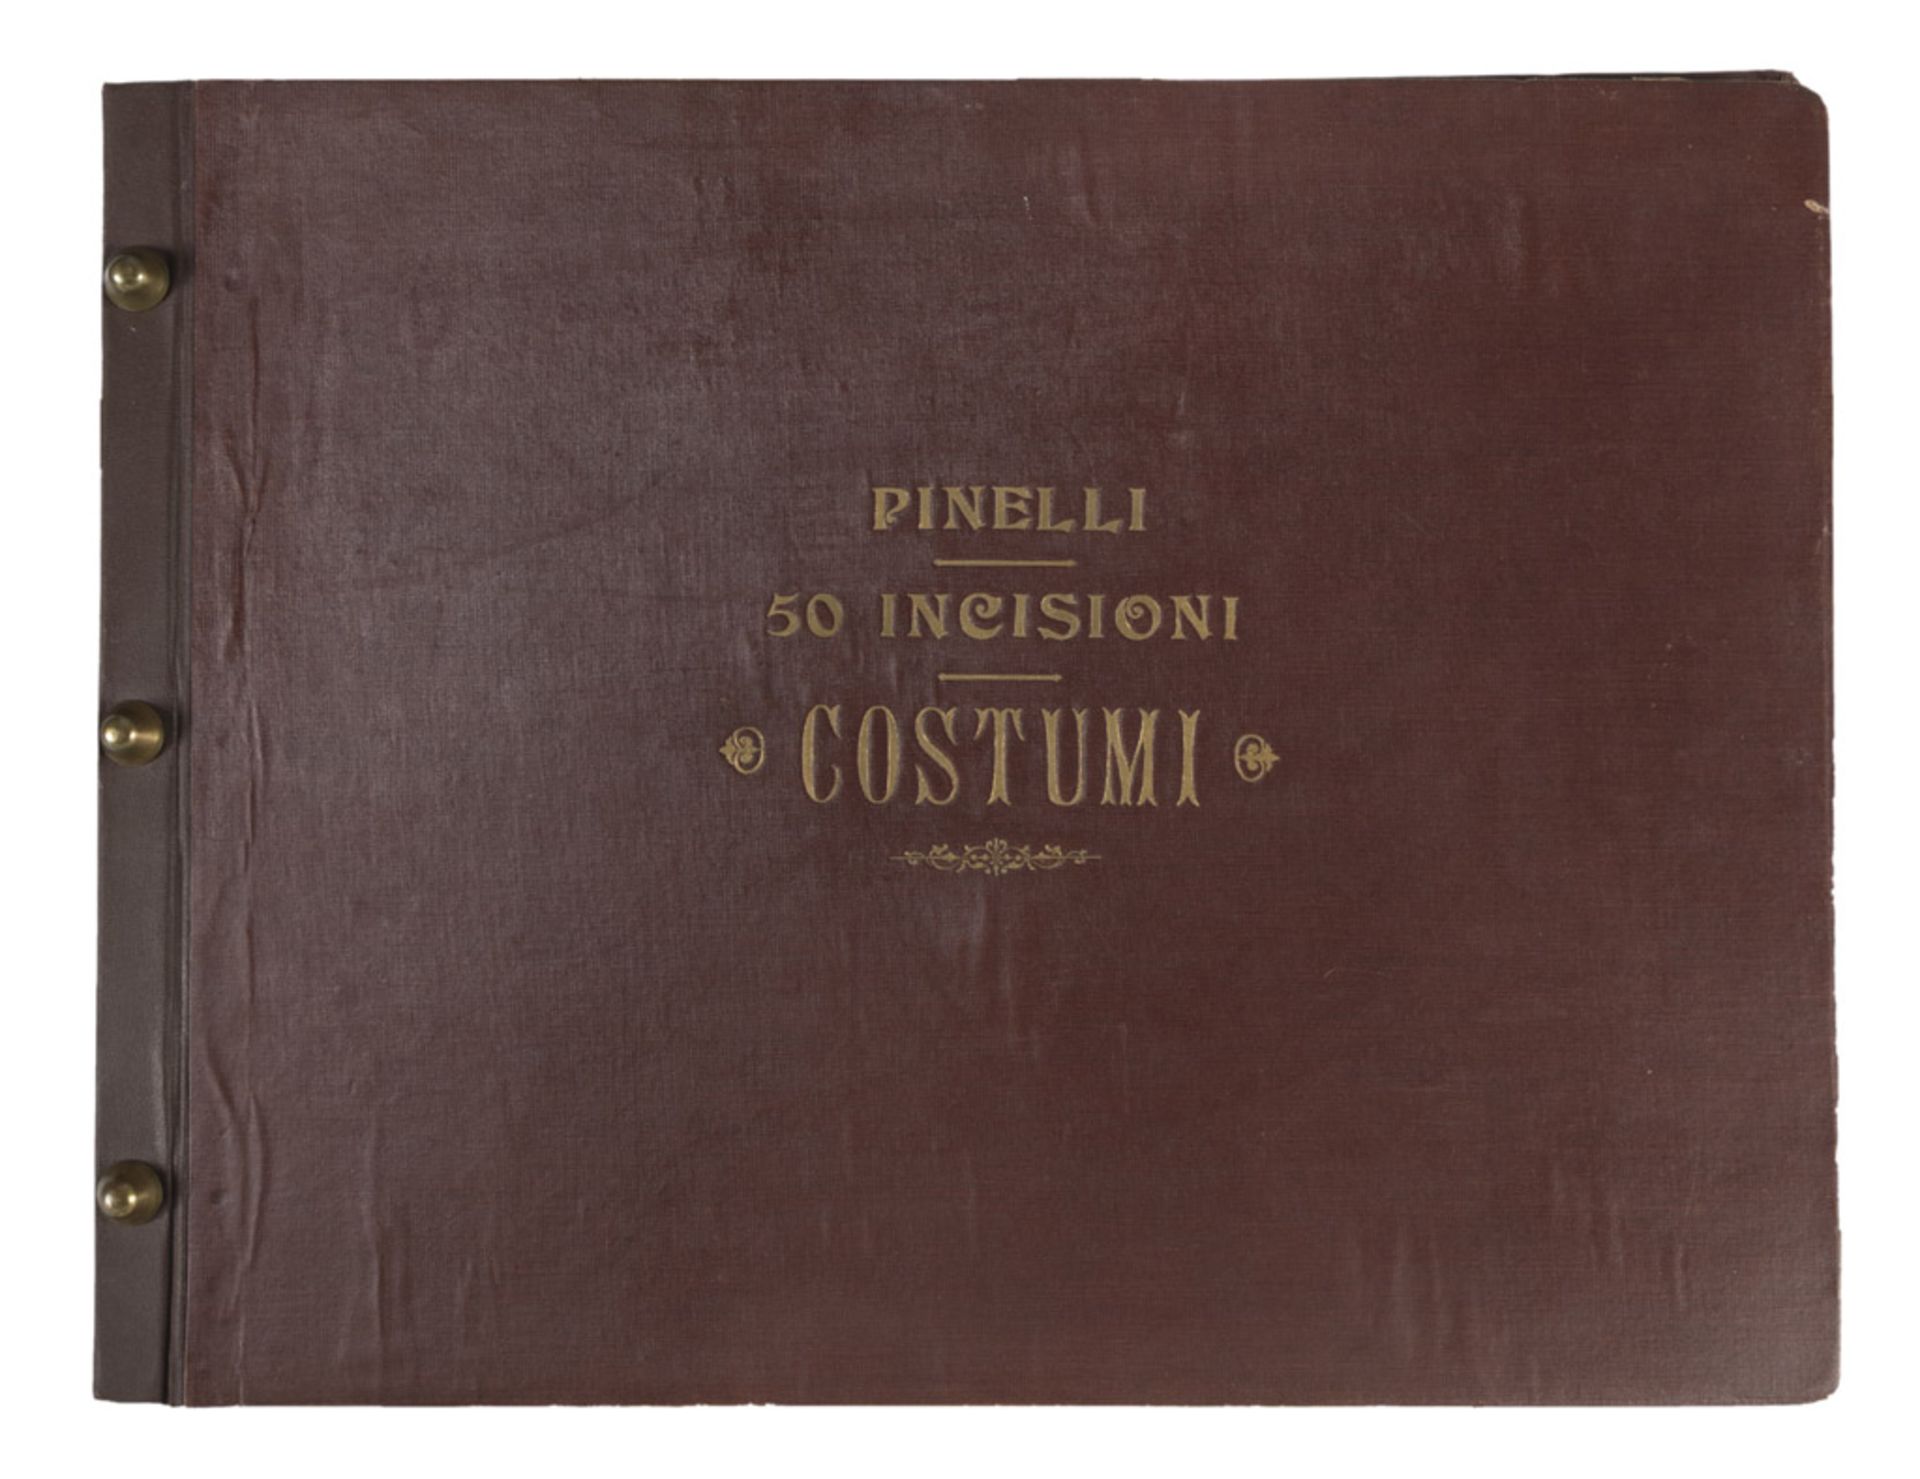 BARTOLOMEO PINELLI 50 engravings. Customes. A volume with engravings of customes and models. 19th